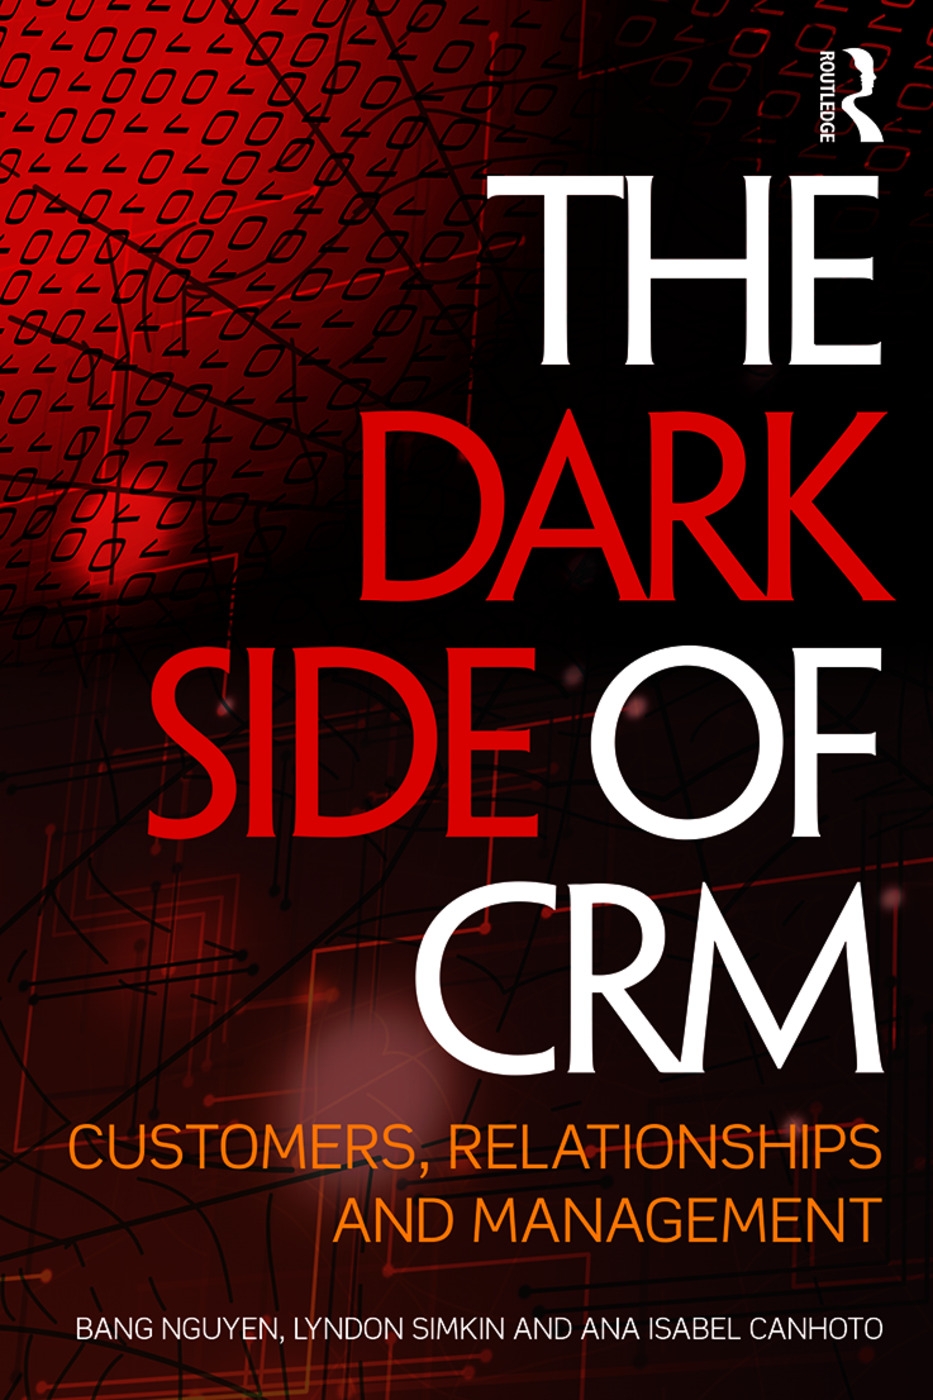 The Dark Side of Crm: Customers, Relationships and Management